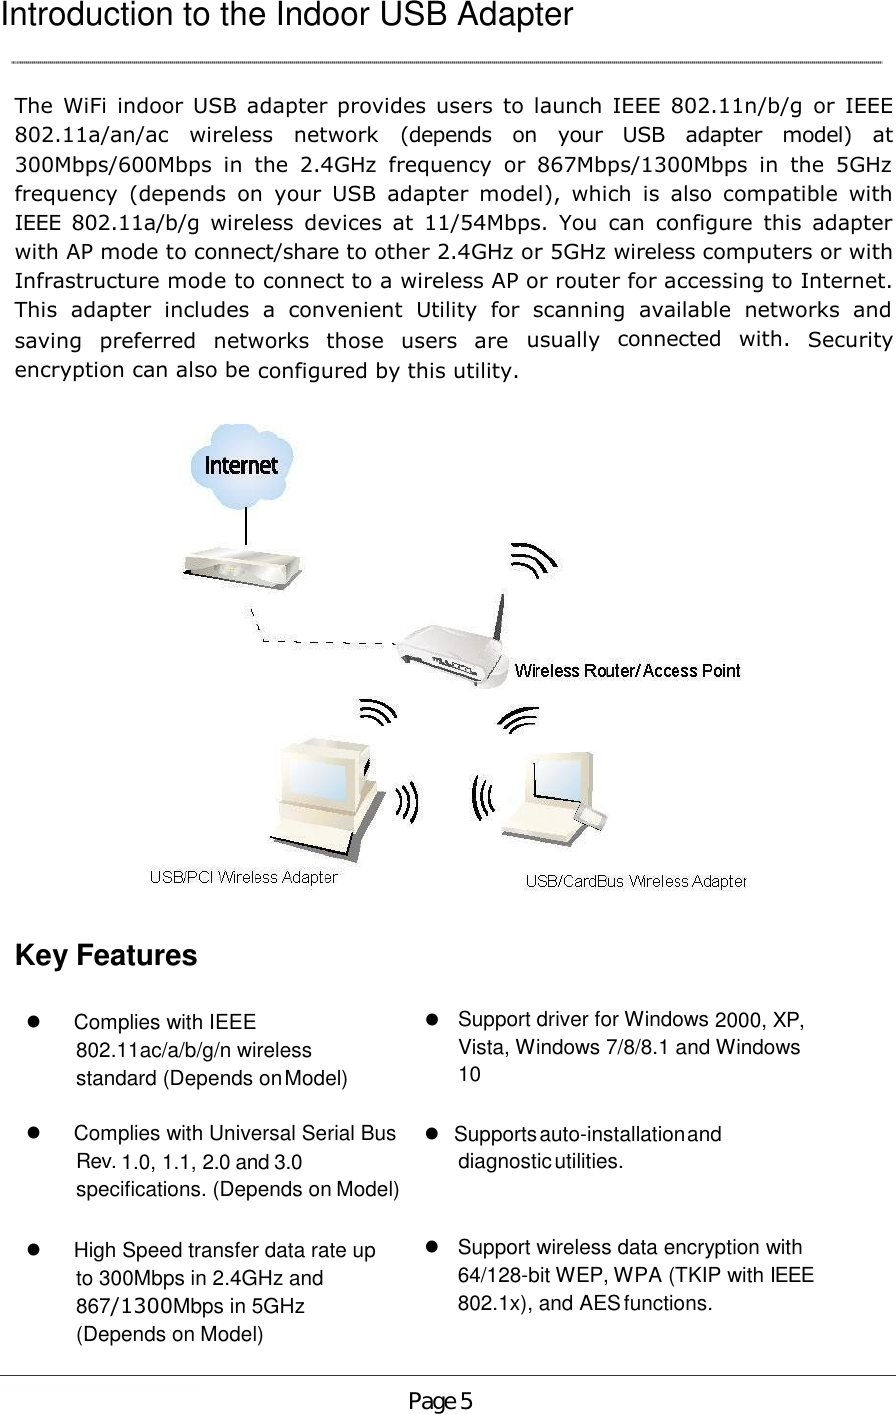 Introduction to the Indoor USB AdapterThe  WiFi  indoor  USB  adapter  provides  users  to  launch  IEEE  802.11n/b/g or  IEEE802.11a/an/ac  wireless  network (depends on your USB adapter model) at300Mbps/600Mbps  in  the  2.4GHz  frequency  or  867Mbps/1300Mbps  in  the  5GHzfrequency  (depends  on  your  USB  adapter  model),  which  is  also  compatible  withIEEE 802.11a/b/g wireless  devices  at  11/54Mbps.  You  can  configure  this  adapterwith AP mode to connect/share to other 2.4GHz or 5GHz wireless computers or withInfrastructure mode to connect to a wireless AP or router for accessing to Internet.This  adapter  includes  a  convenient  Utility  for  scanning  available  networks  andsaving  preferred  networks  those  users  are usually connected with. Securityencryption can also be configured by this utility.Key FeaturesComplies with IEEE802.11ac/a/b/g/n wirelessstandard (Depends onModel)Support driver for Windows 2000, XP,Vista, Windows 7/8/8.1 and Windows10Complies with Universal Serial BusRev. 1.0, 1.1, 2.0 and 3.0specifications. (Depends on Model)Supportsauto-installationanddiagnosticutilities.High Speed transfer data rate upto 300Mbps in 2.4GHz and867/1300Mbps in 5GHz(Depends on Model)Support wireless data encryption with64/128-bit WEP, WPA (TKIP with IEEE802.1x), and AESfunctions.Page 5